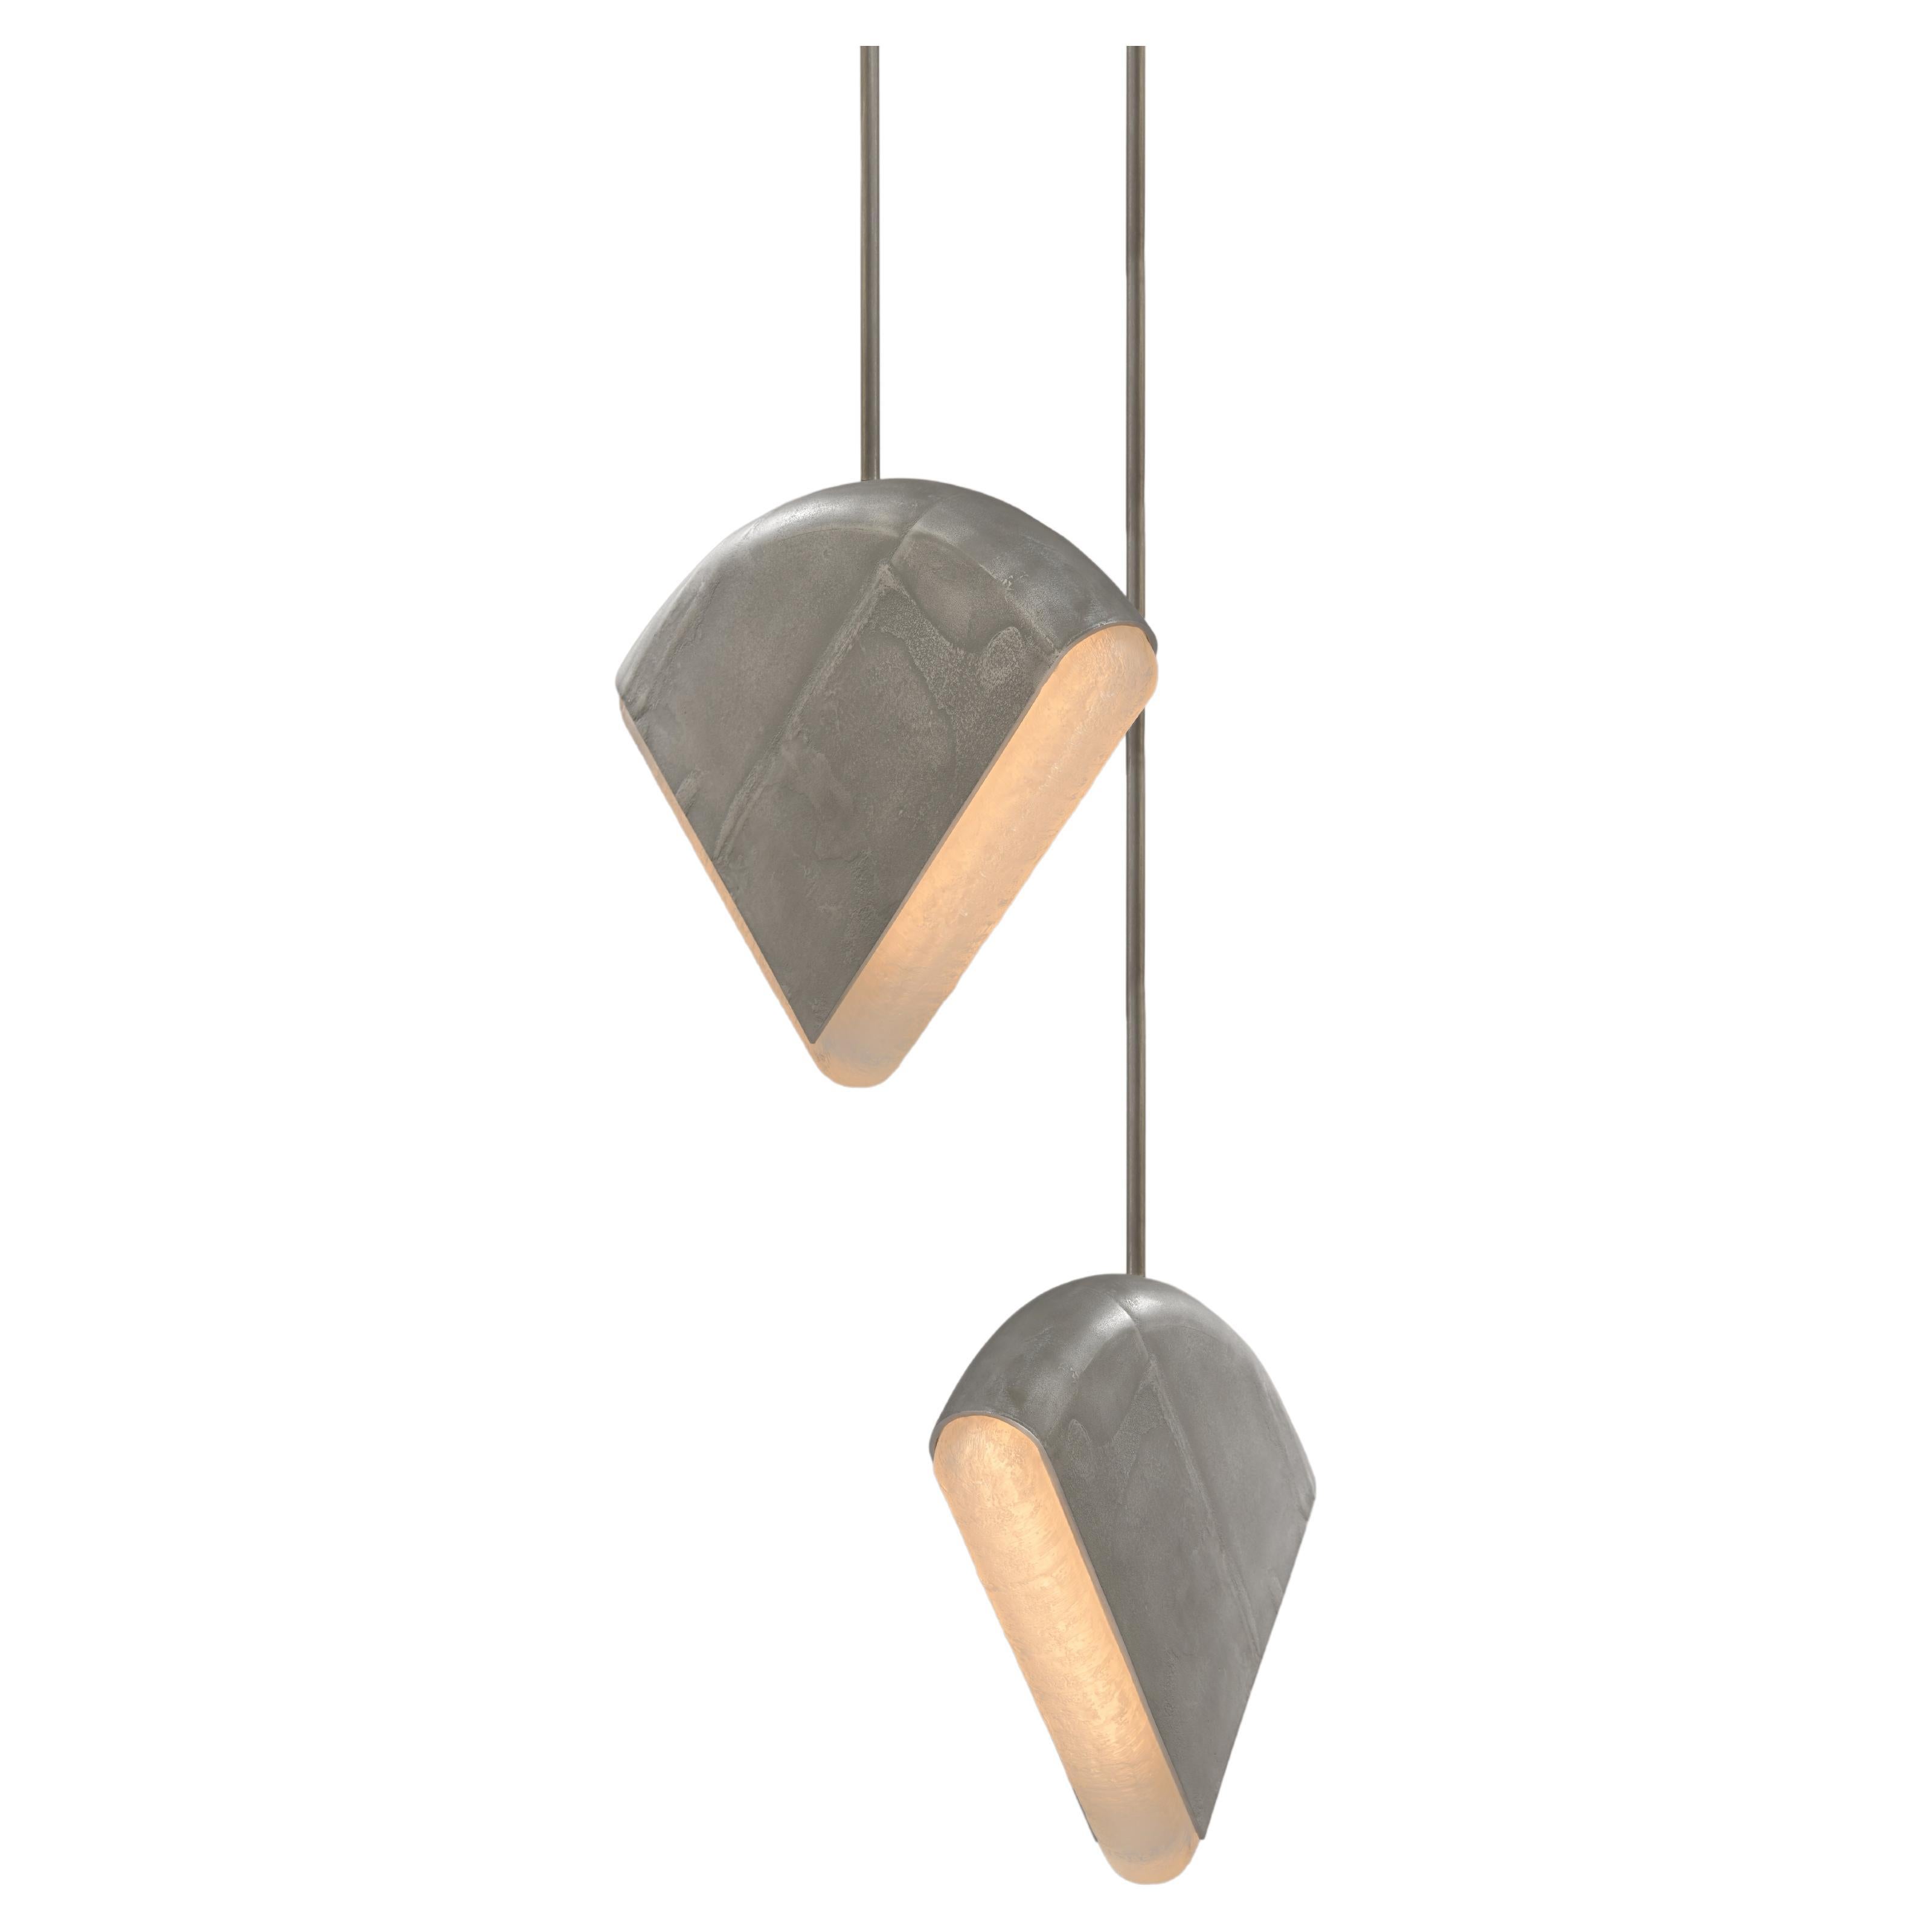 Pendant light "bb" in Sand-Cast Aluminium with Glass Diffuser by Corpus Studio For Sale